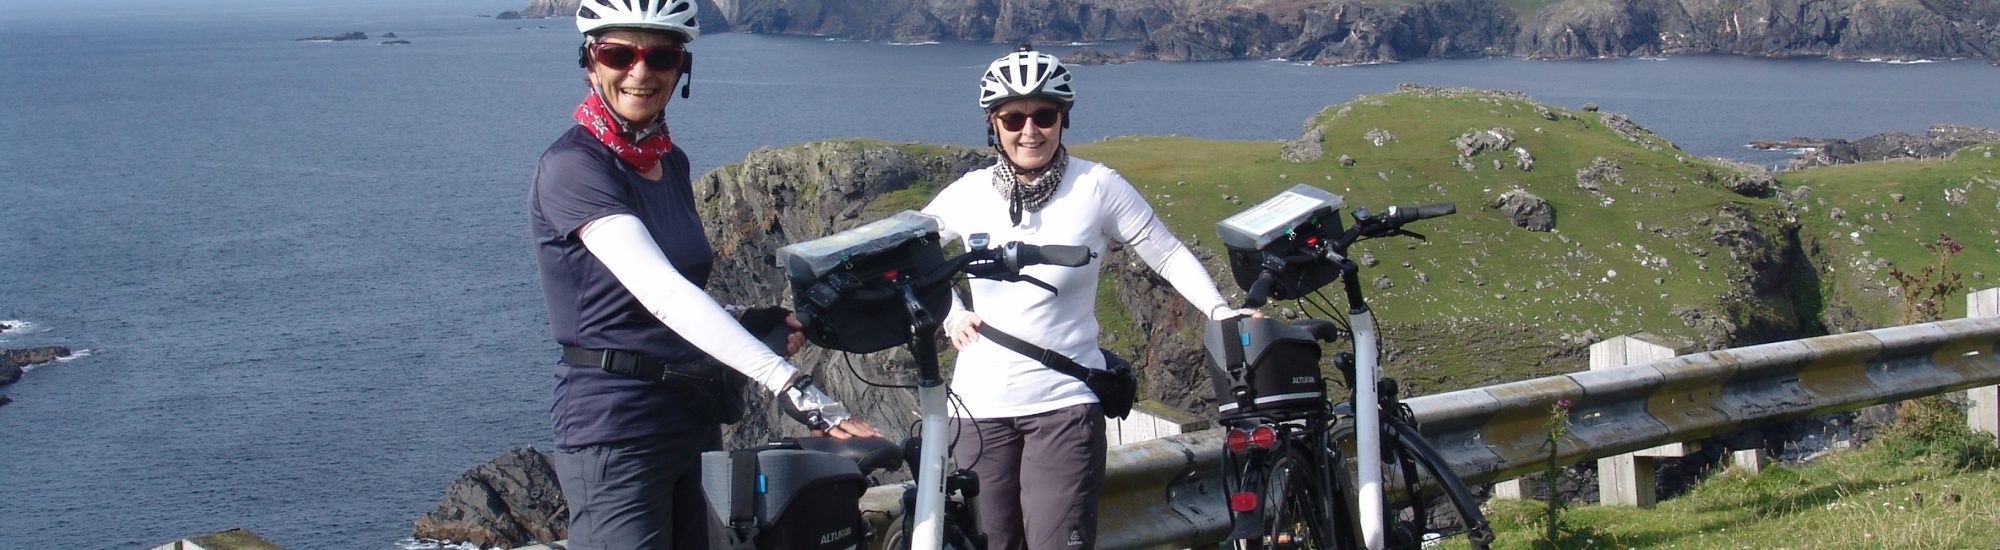 Cycling vacation in Donegal Ireland with Ireland by Bike